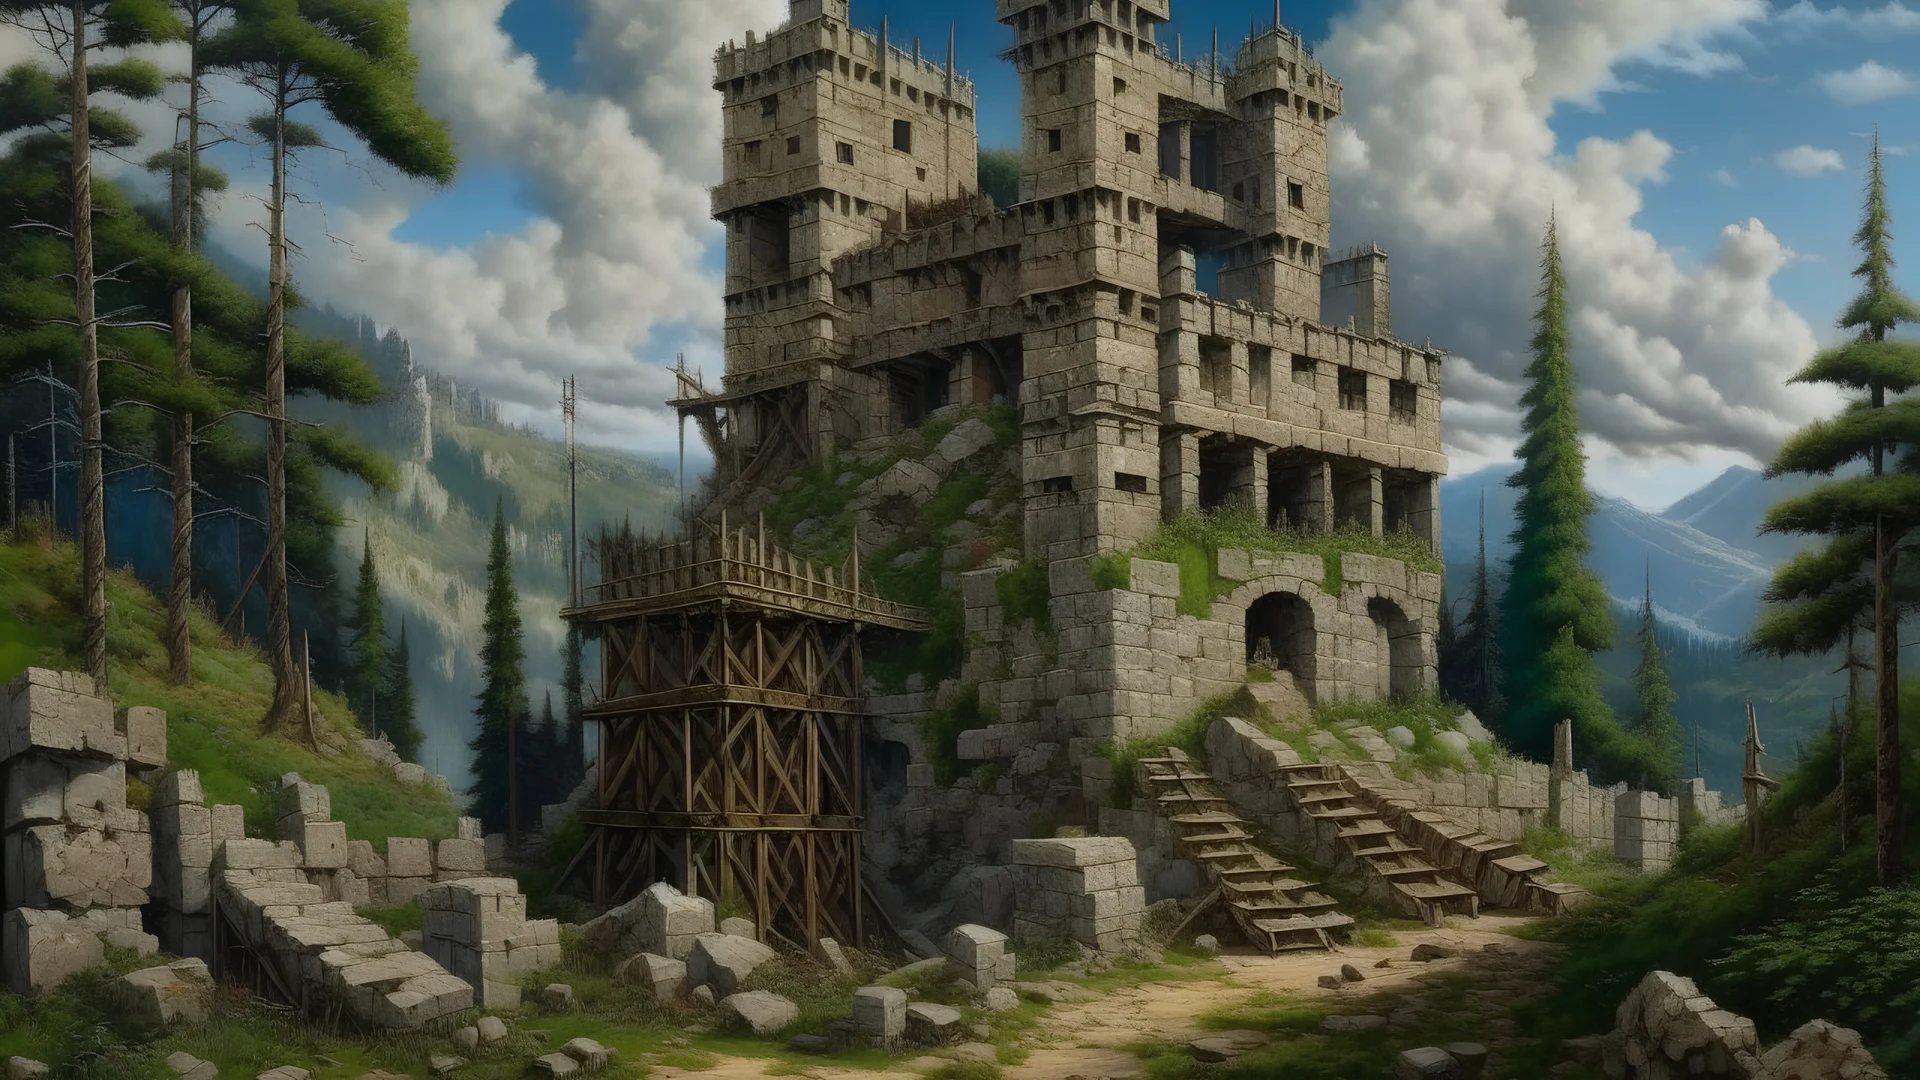 A ruined stone fortress, repaired with wood, scaffolding, palisades, spikes, half destroyed, realistic, medieval, painterly, Bob Ross painting